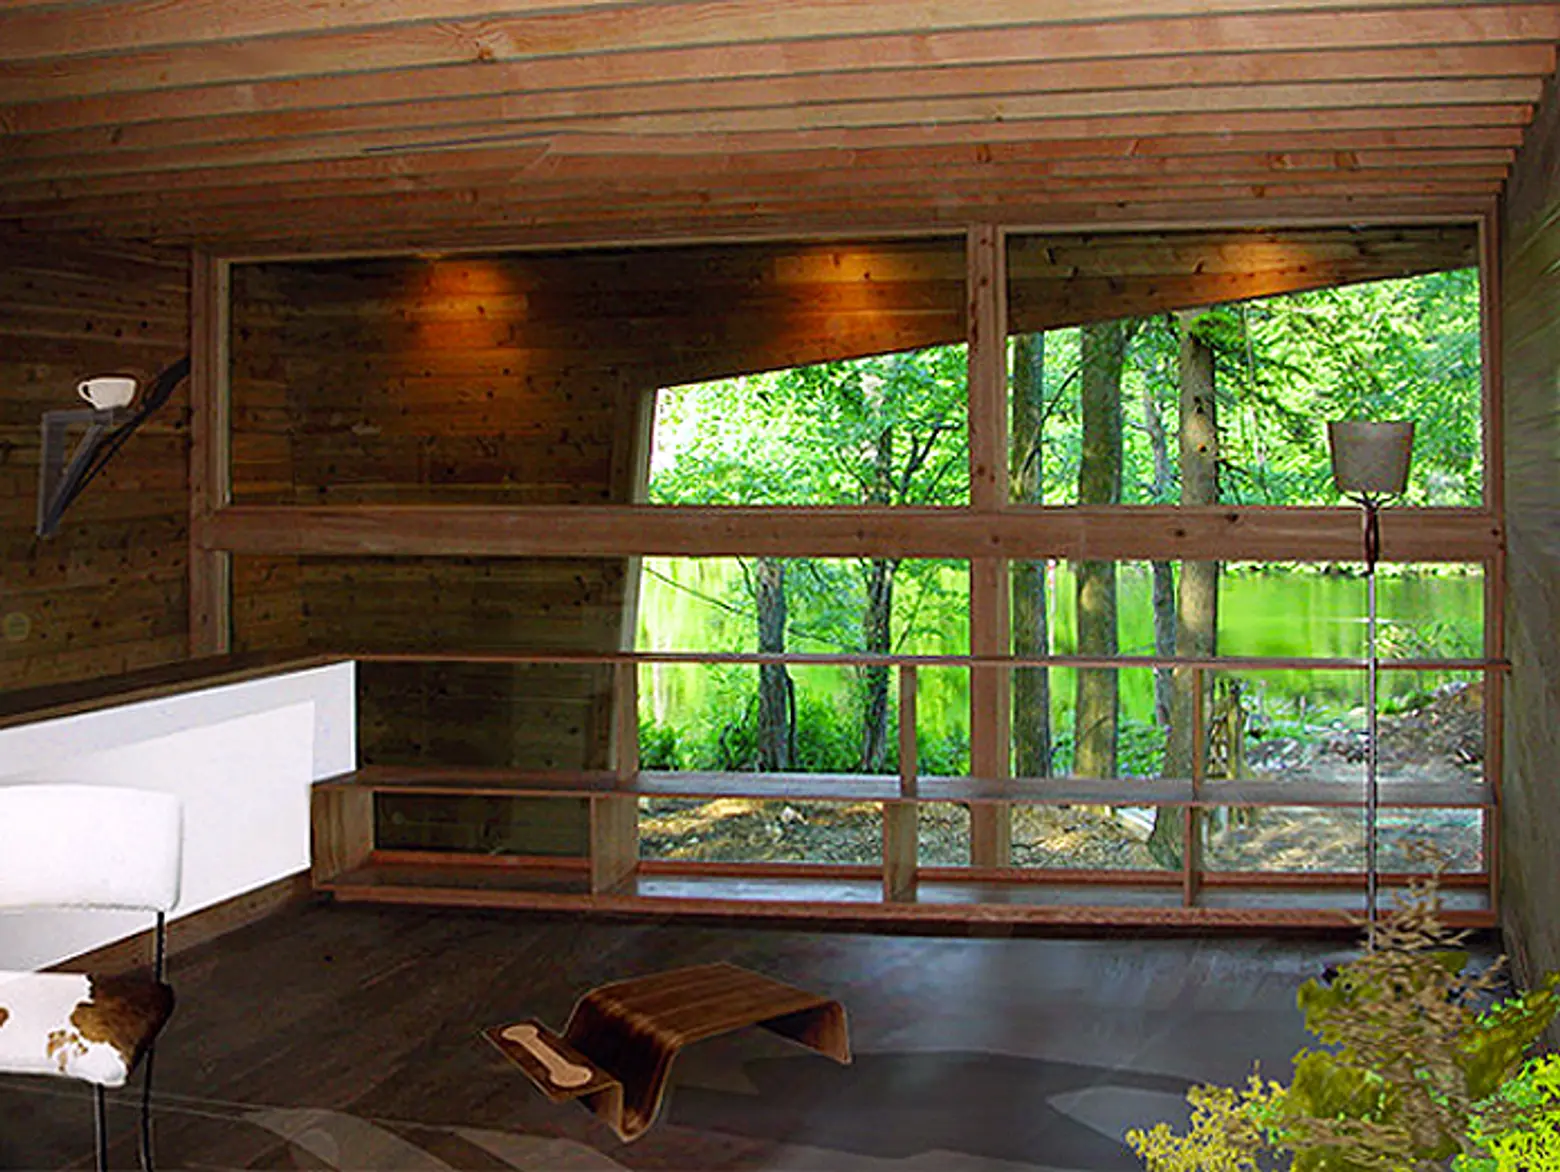 Carmel Upstate Guest House designed by Archi-Tectonics